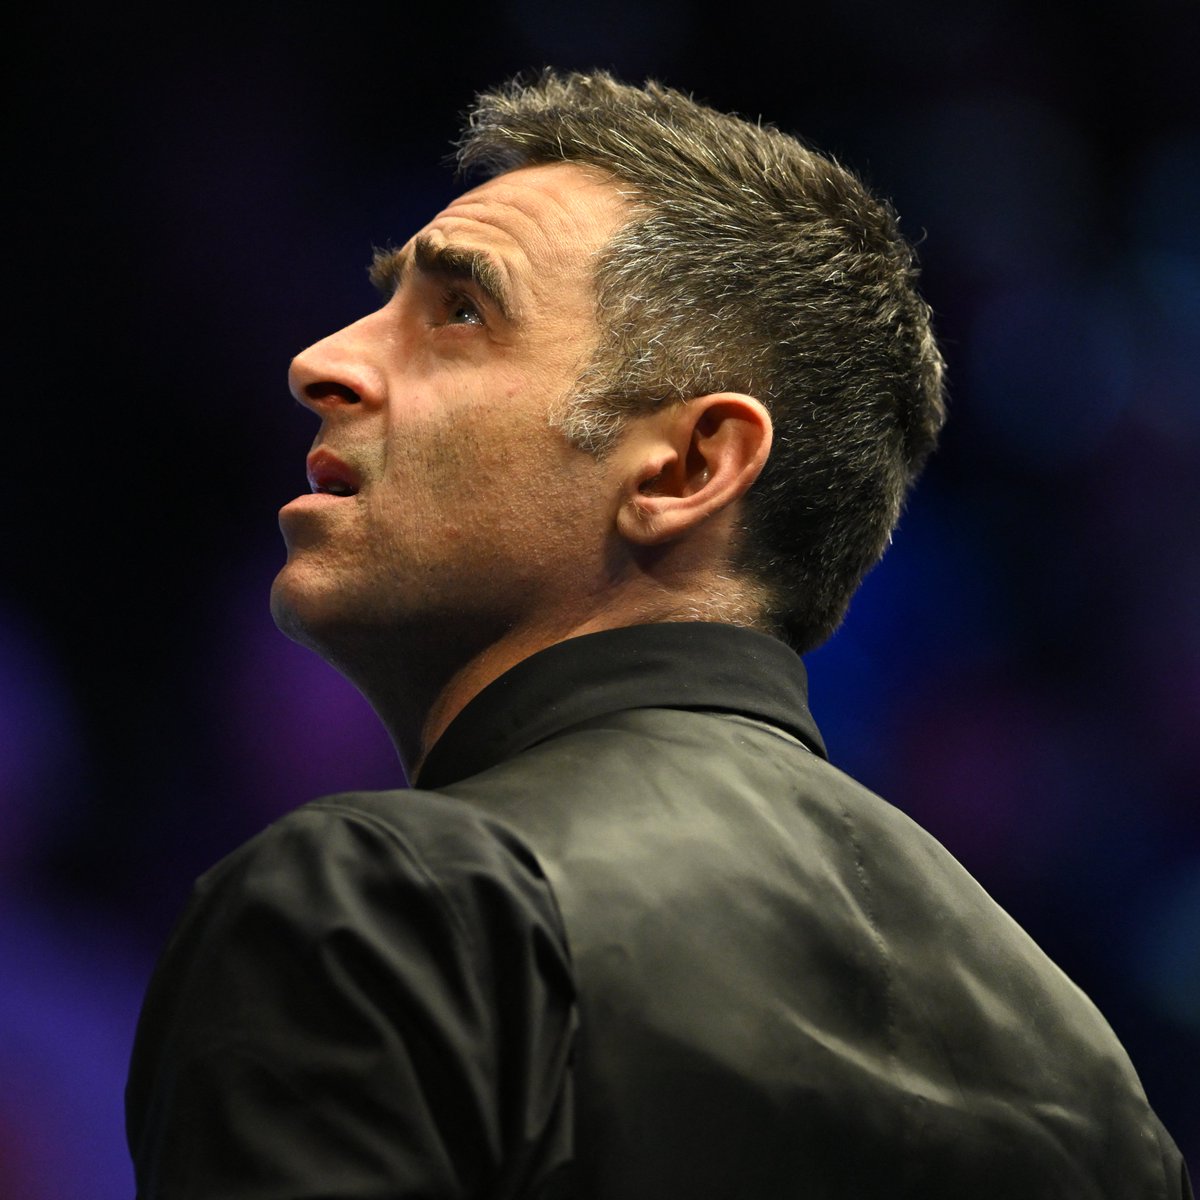 A reminder that Ronnie O'Sullivan has only lost three games of snooker this season. It started 207 days ago.